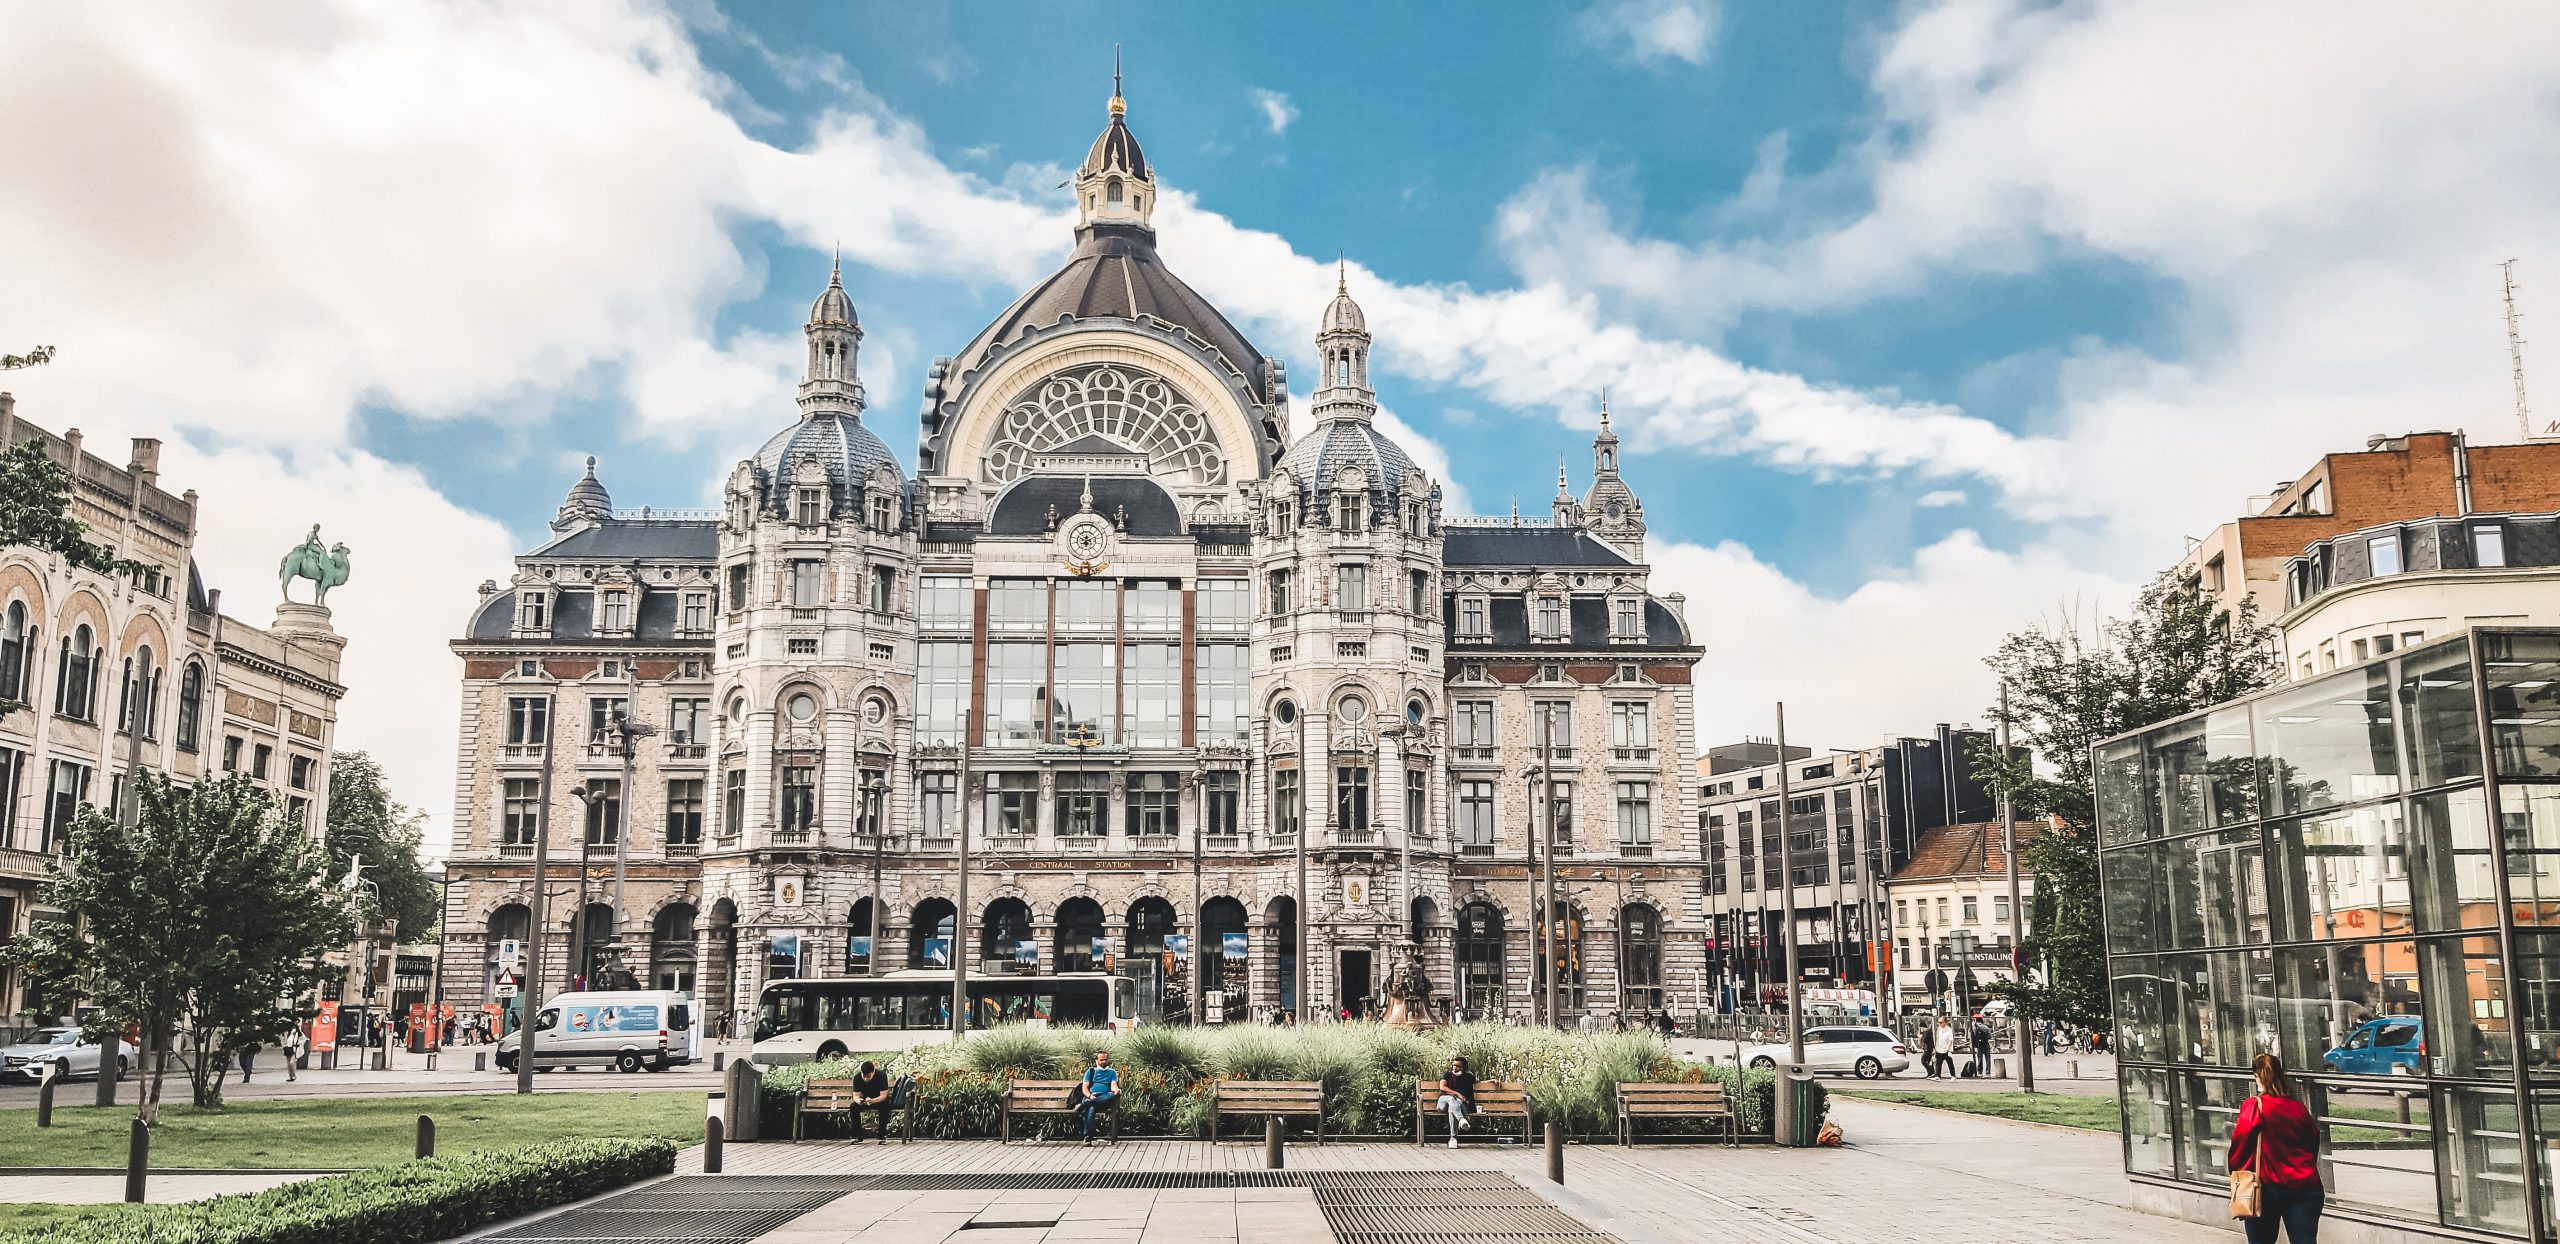 The beautiful architecture of Antwerp Central Station